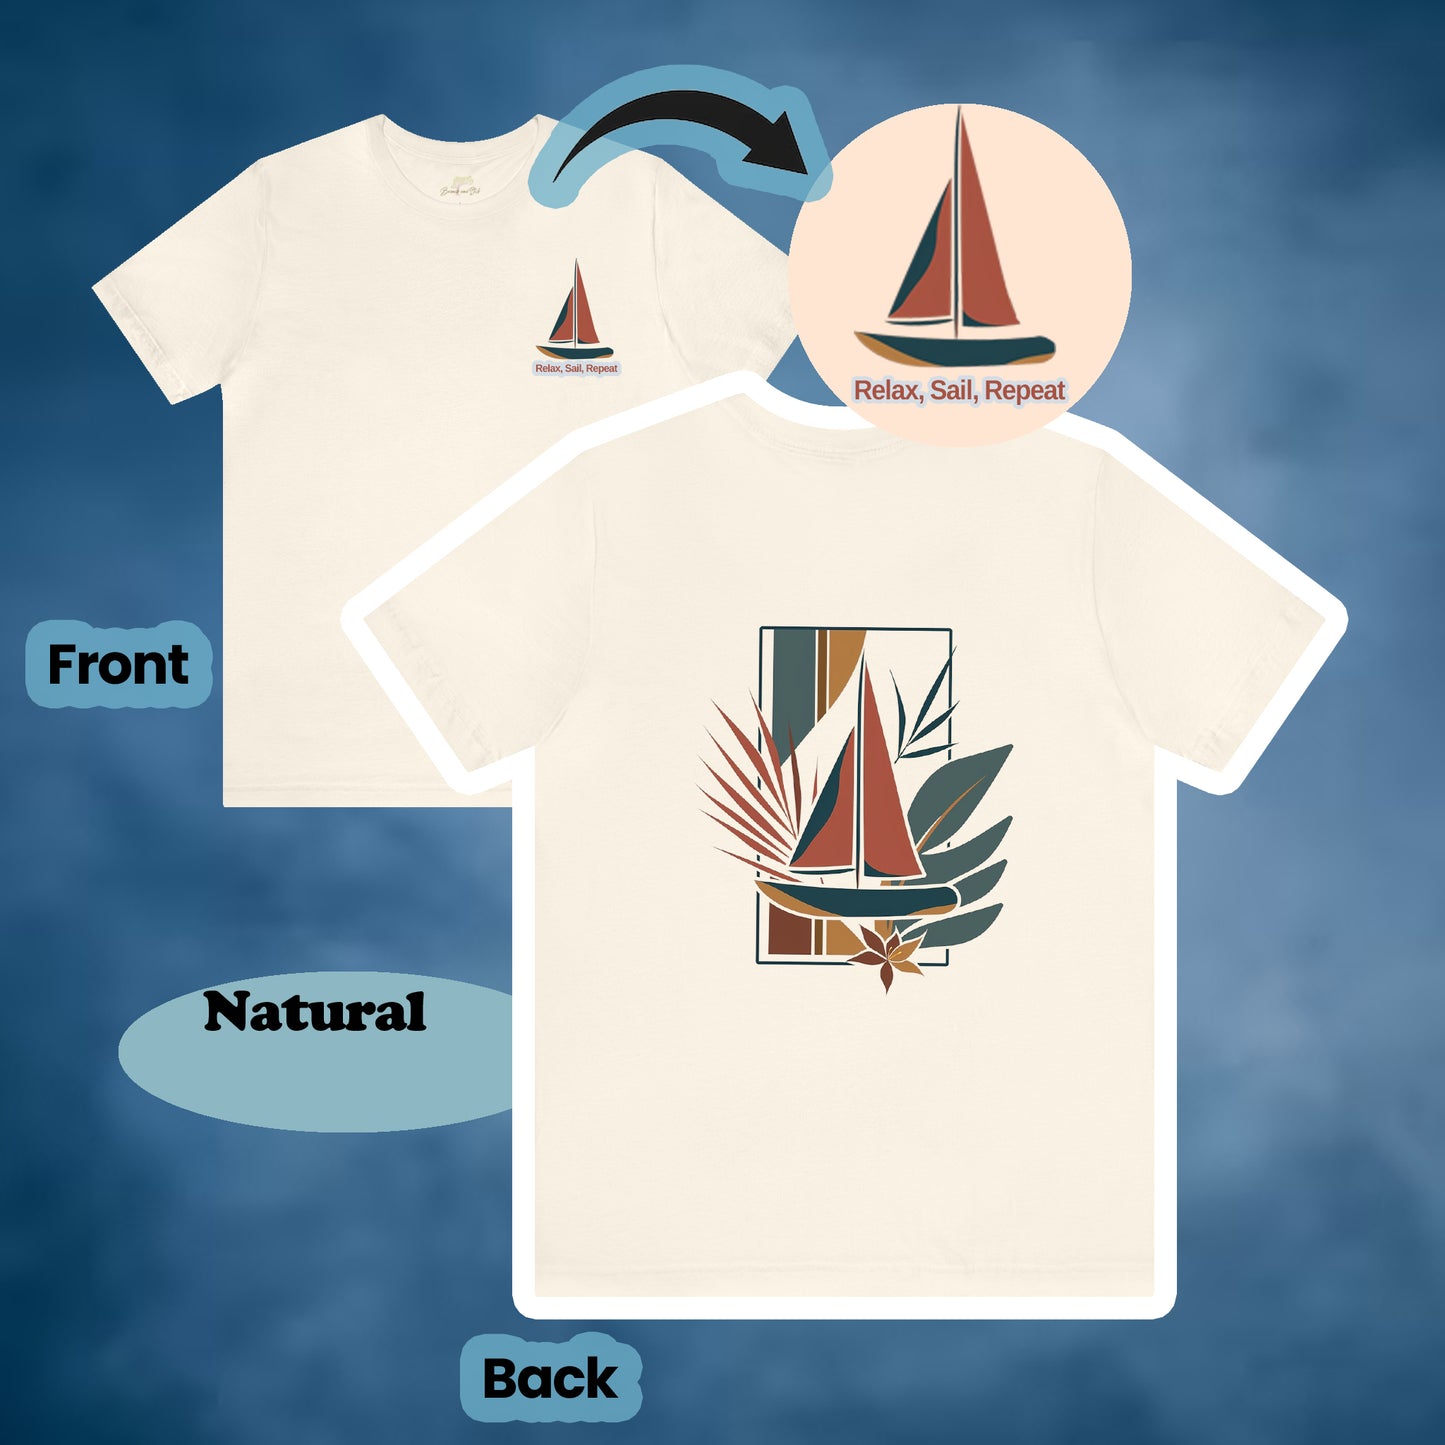 "Relax, Sail, Repeat" 2-Sided Sailboat Scene Tee - A high-quality tee featuring a tranquil sailboat scene on the front and the iconic phrase "Relax, Sail, Repeat" on the back